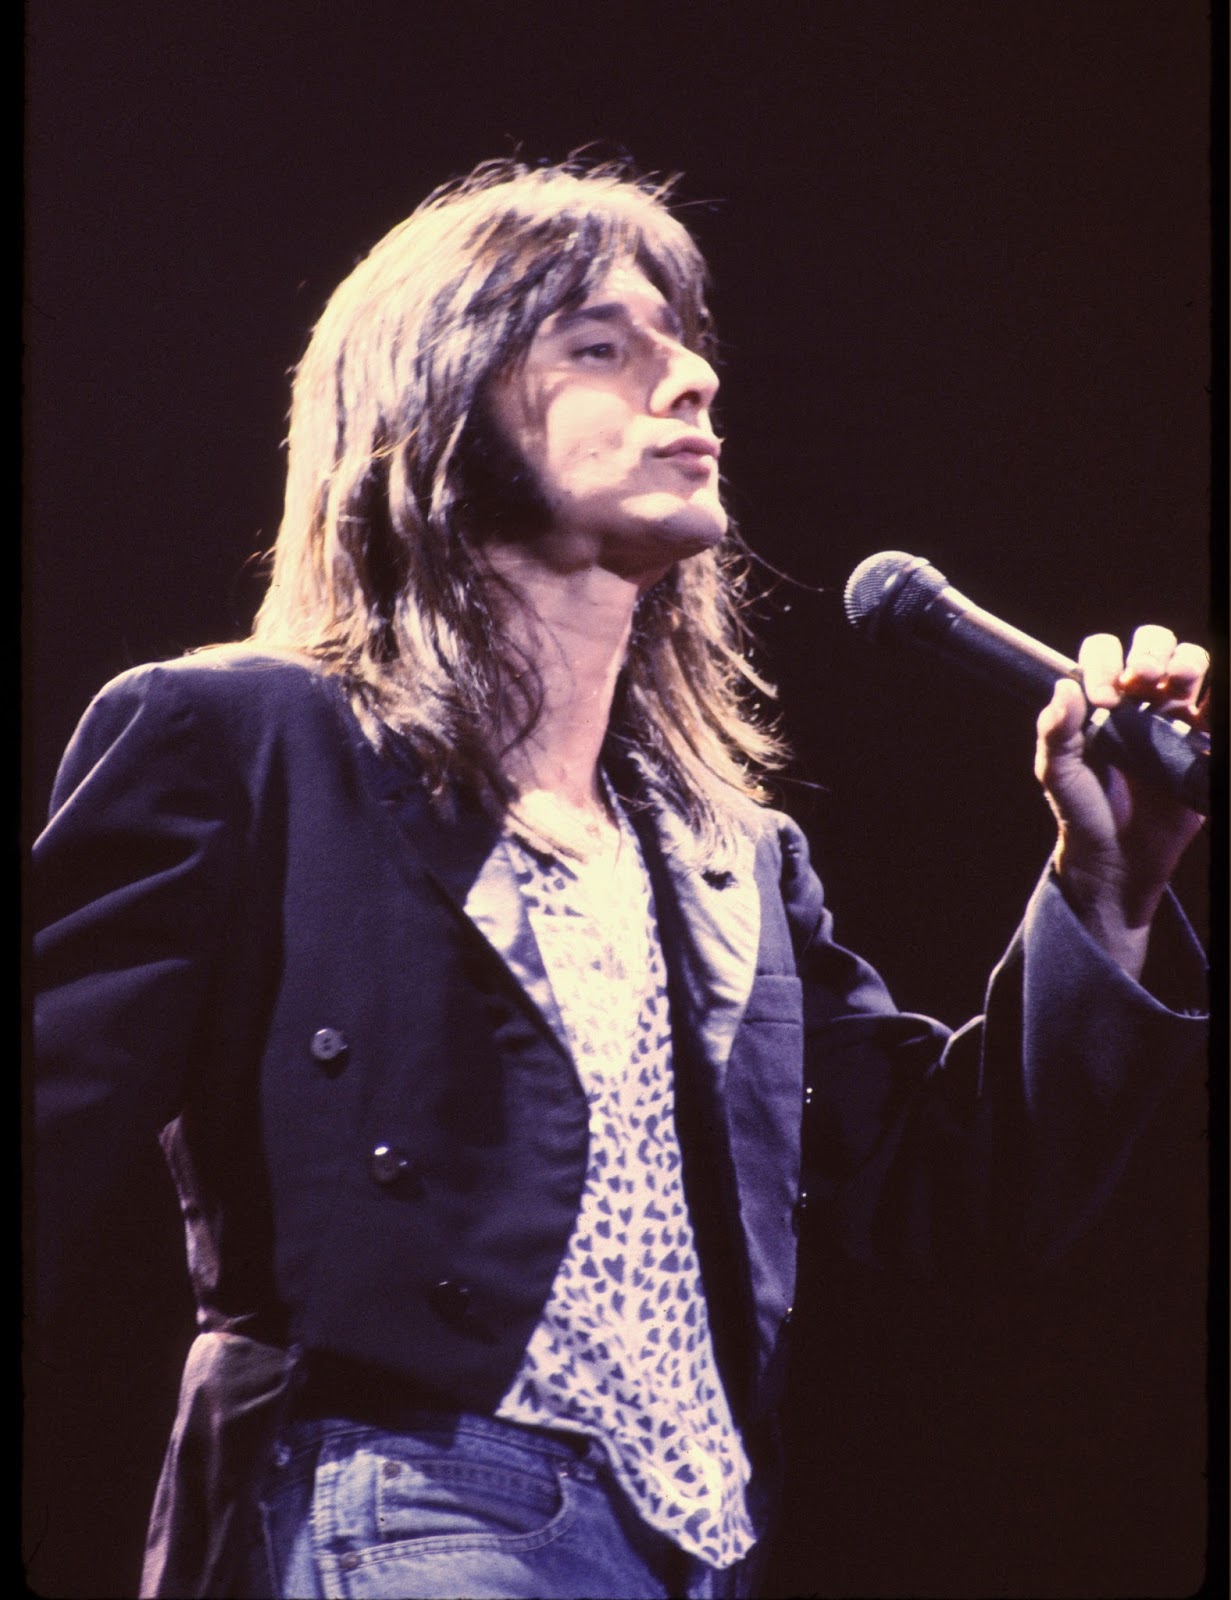 steve perry's first performance with journey